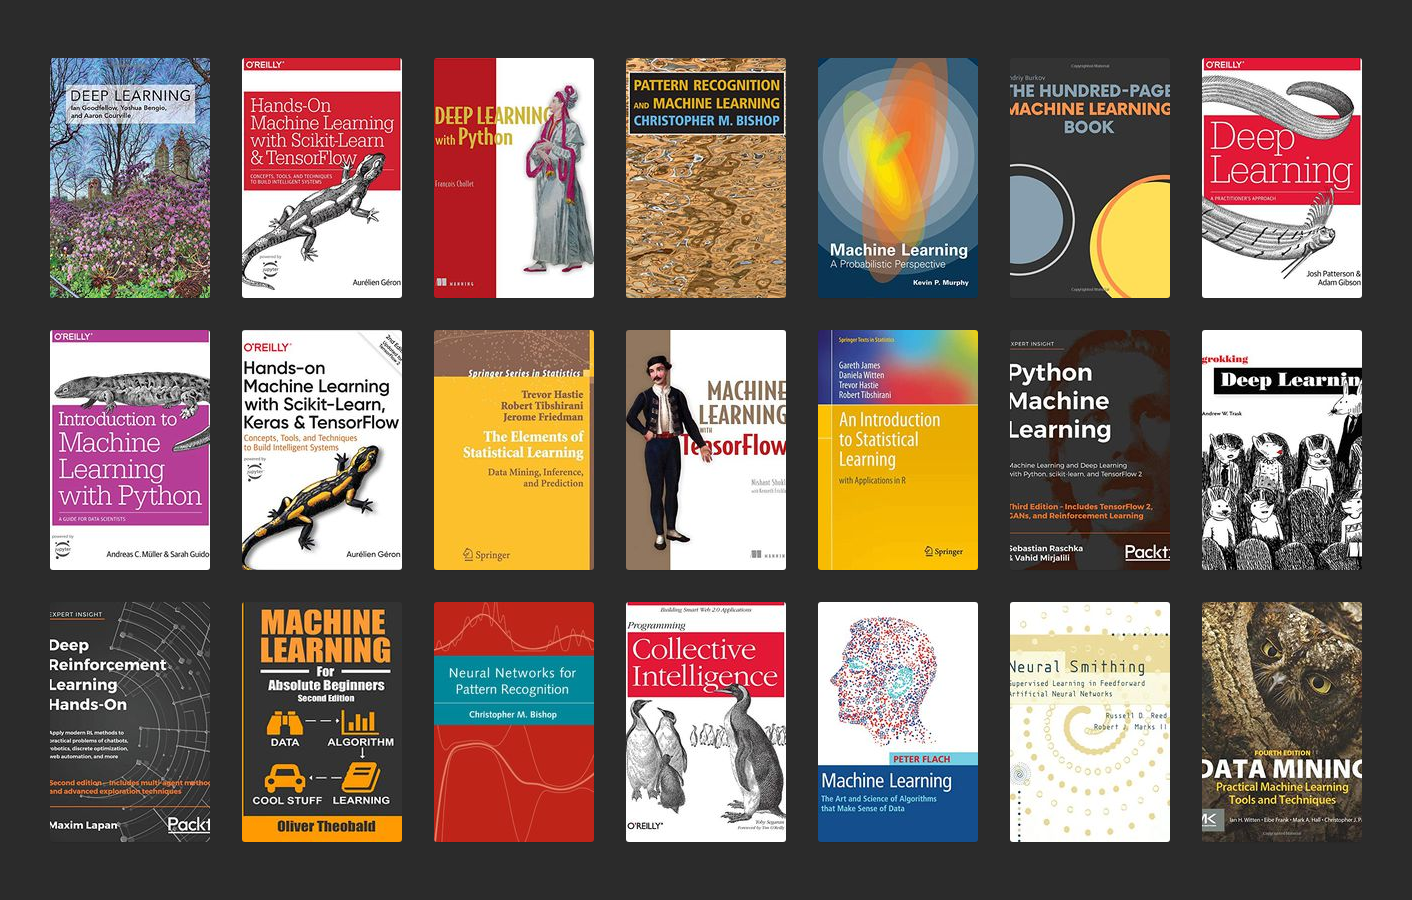 The Garrison Platoon Of Books: How To Read 43 Machine Learning Books in a Year